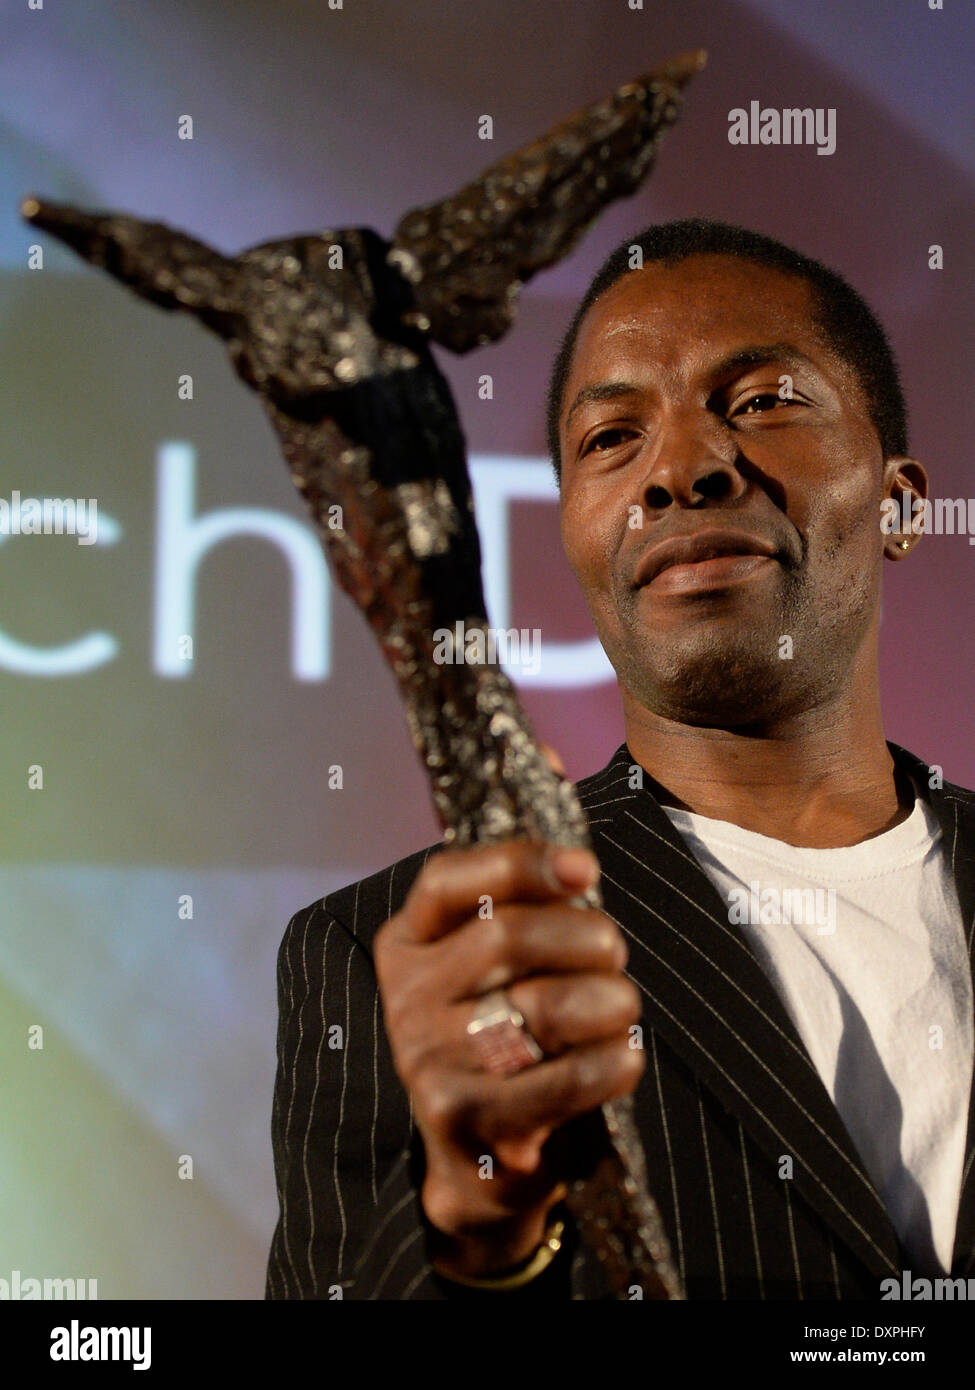 Ivory Coast actor Isaach De Bankole received the Kristian Award for his Contributions to World Cinema at the Prague International Film Festival Febiofest on March 28, 2014 in Prague, Czech Republic. (CTK Photo/Michal Krumphanzl) Stock Photo